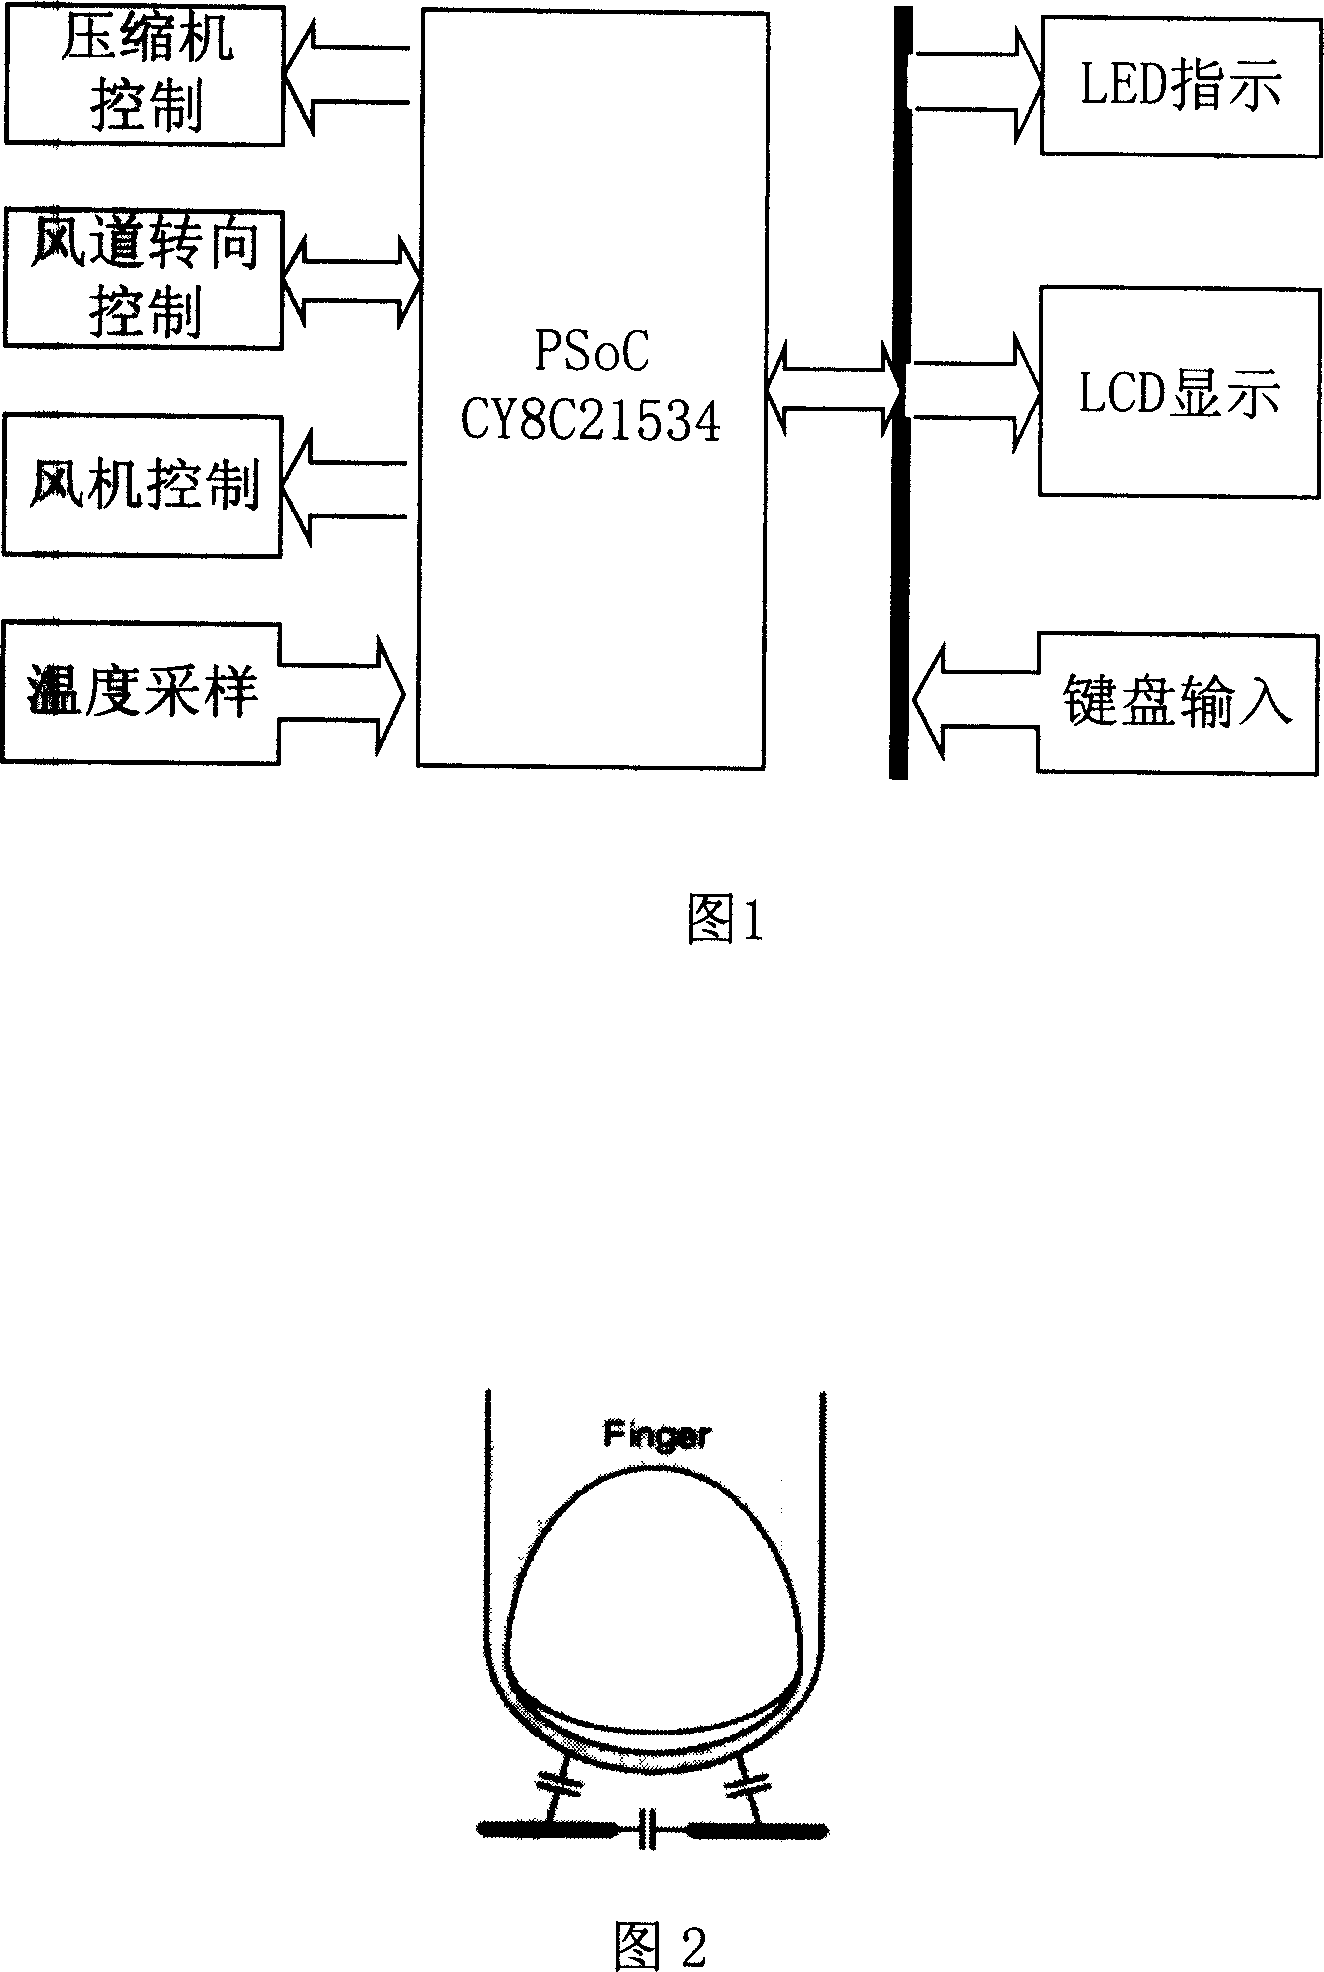 Control system of vehicle air-conditioning